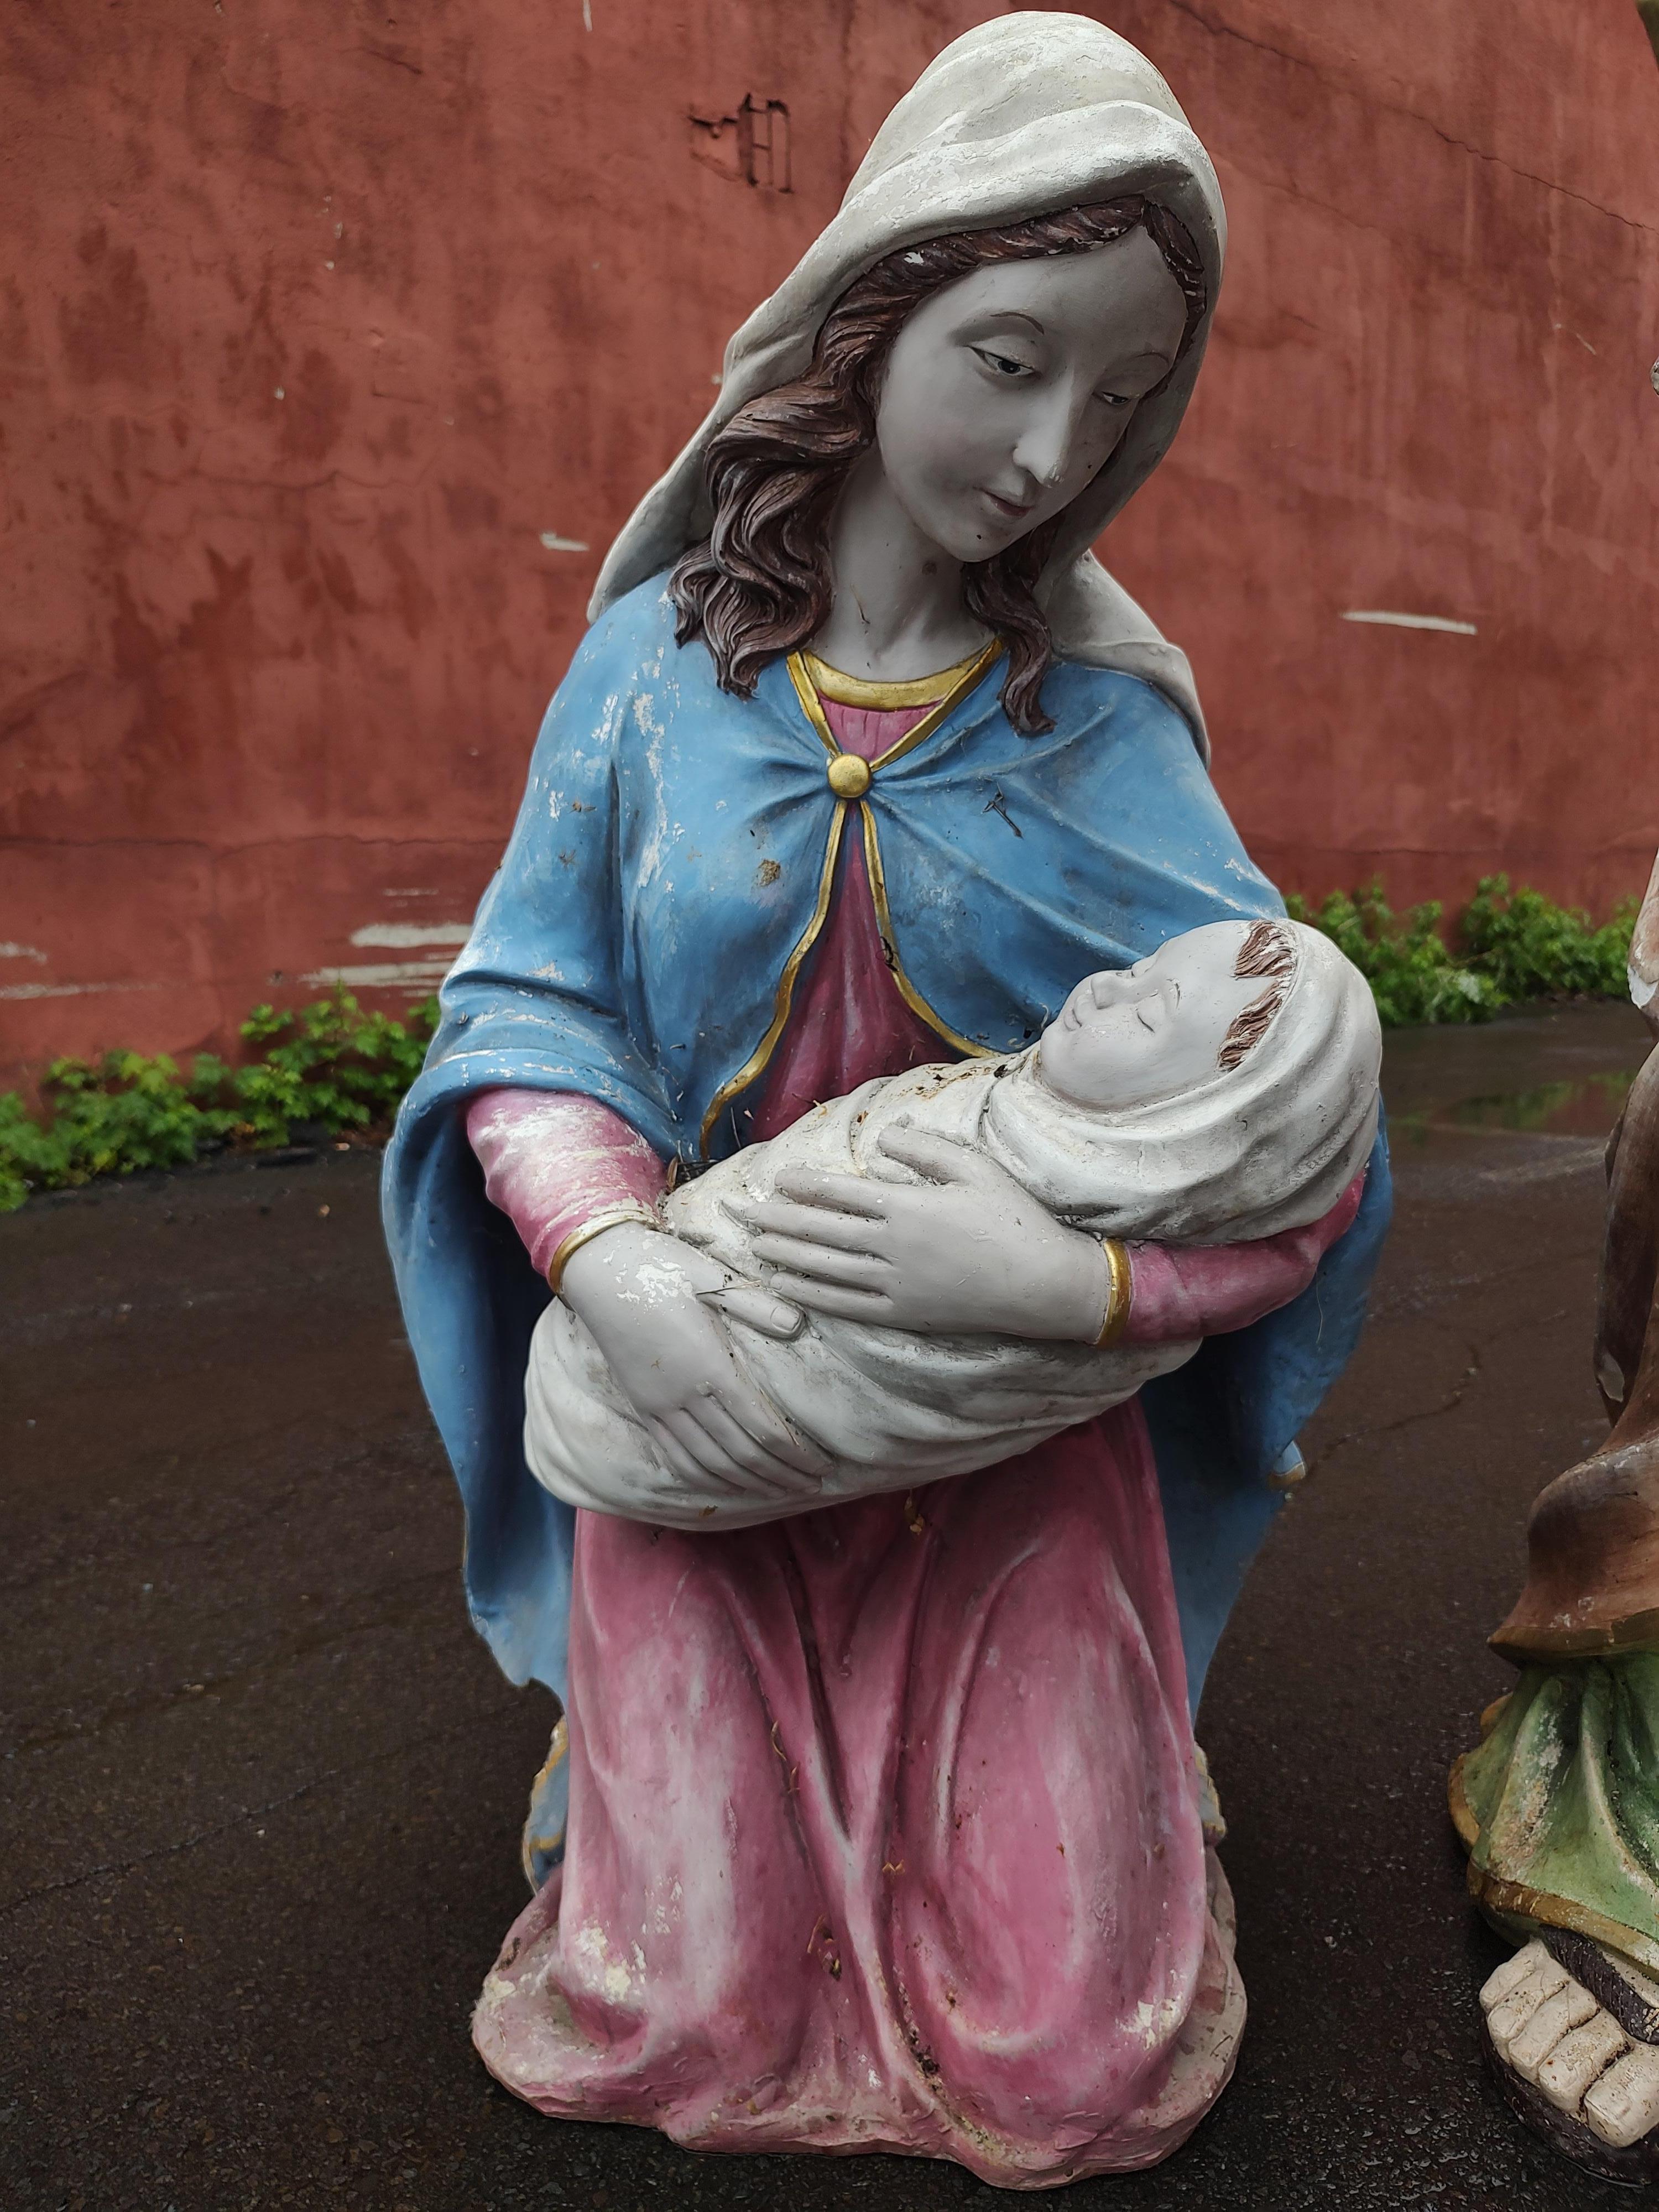 Fabulous tall life size Joseph with Mary kneeling cradling Baby Jesus in what was a nativity scene. Molded Fiberglass with a coat of plaster over and then painted. Detailed shrouded clothing with lifelike face and hands. Gilt detailing on robes.